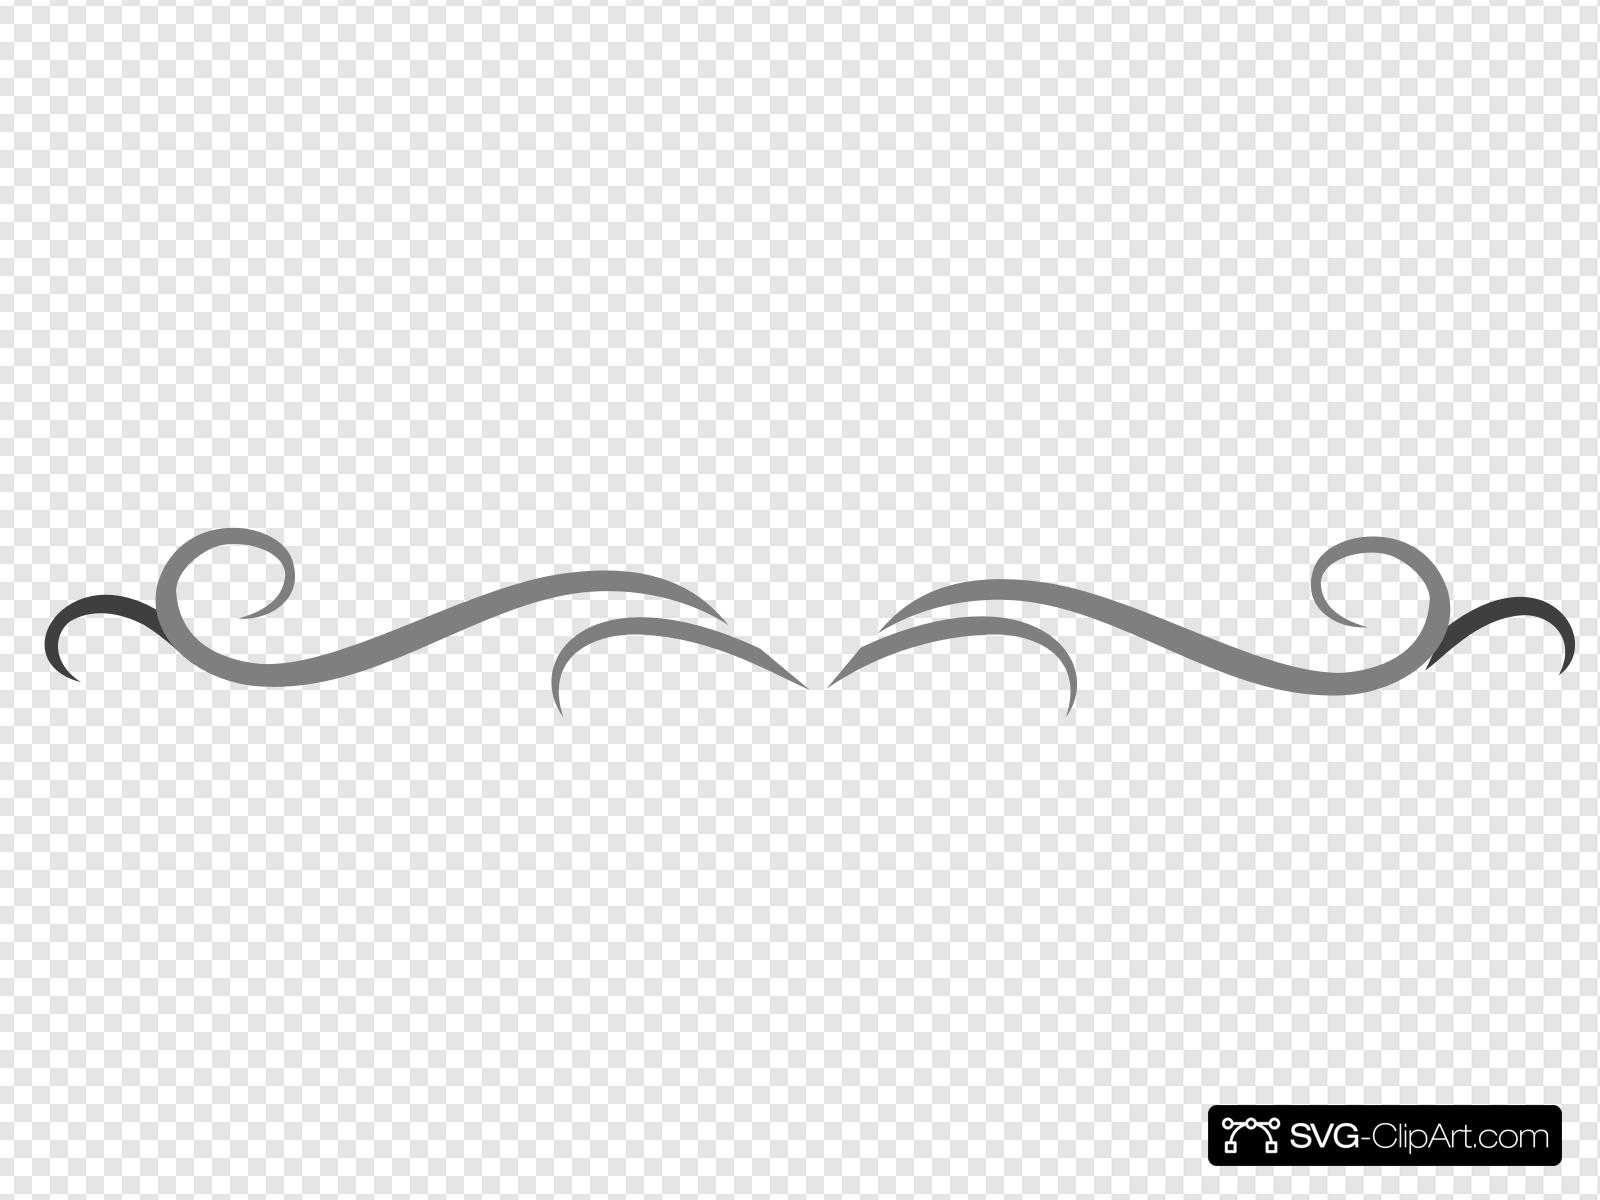 Grey Curly Line Design Clip art, Icon and SVG